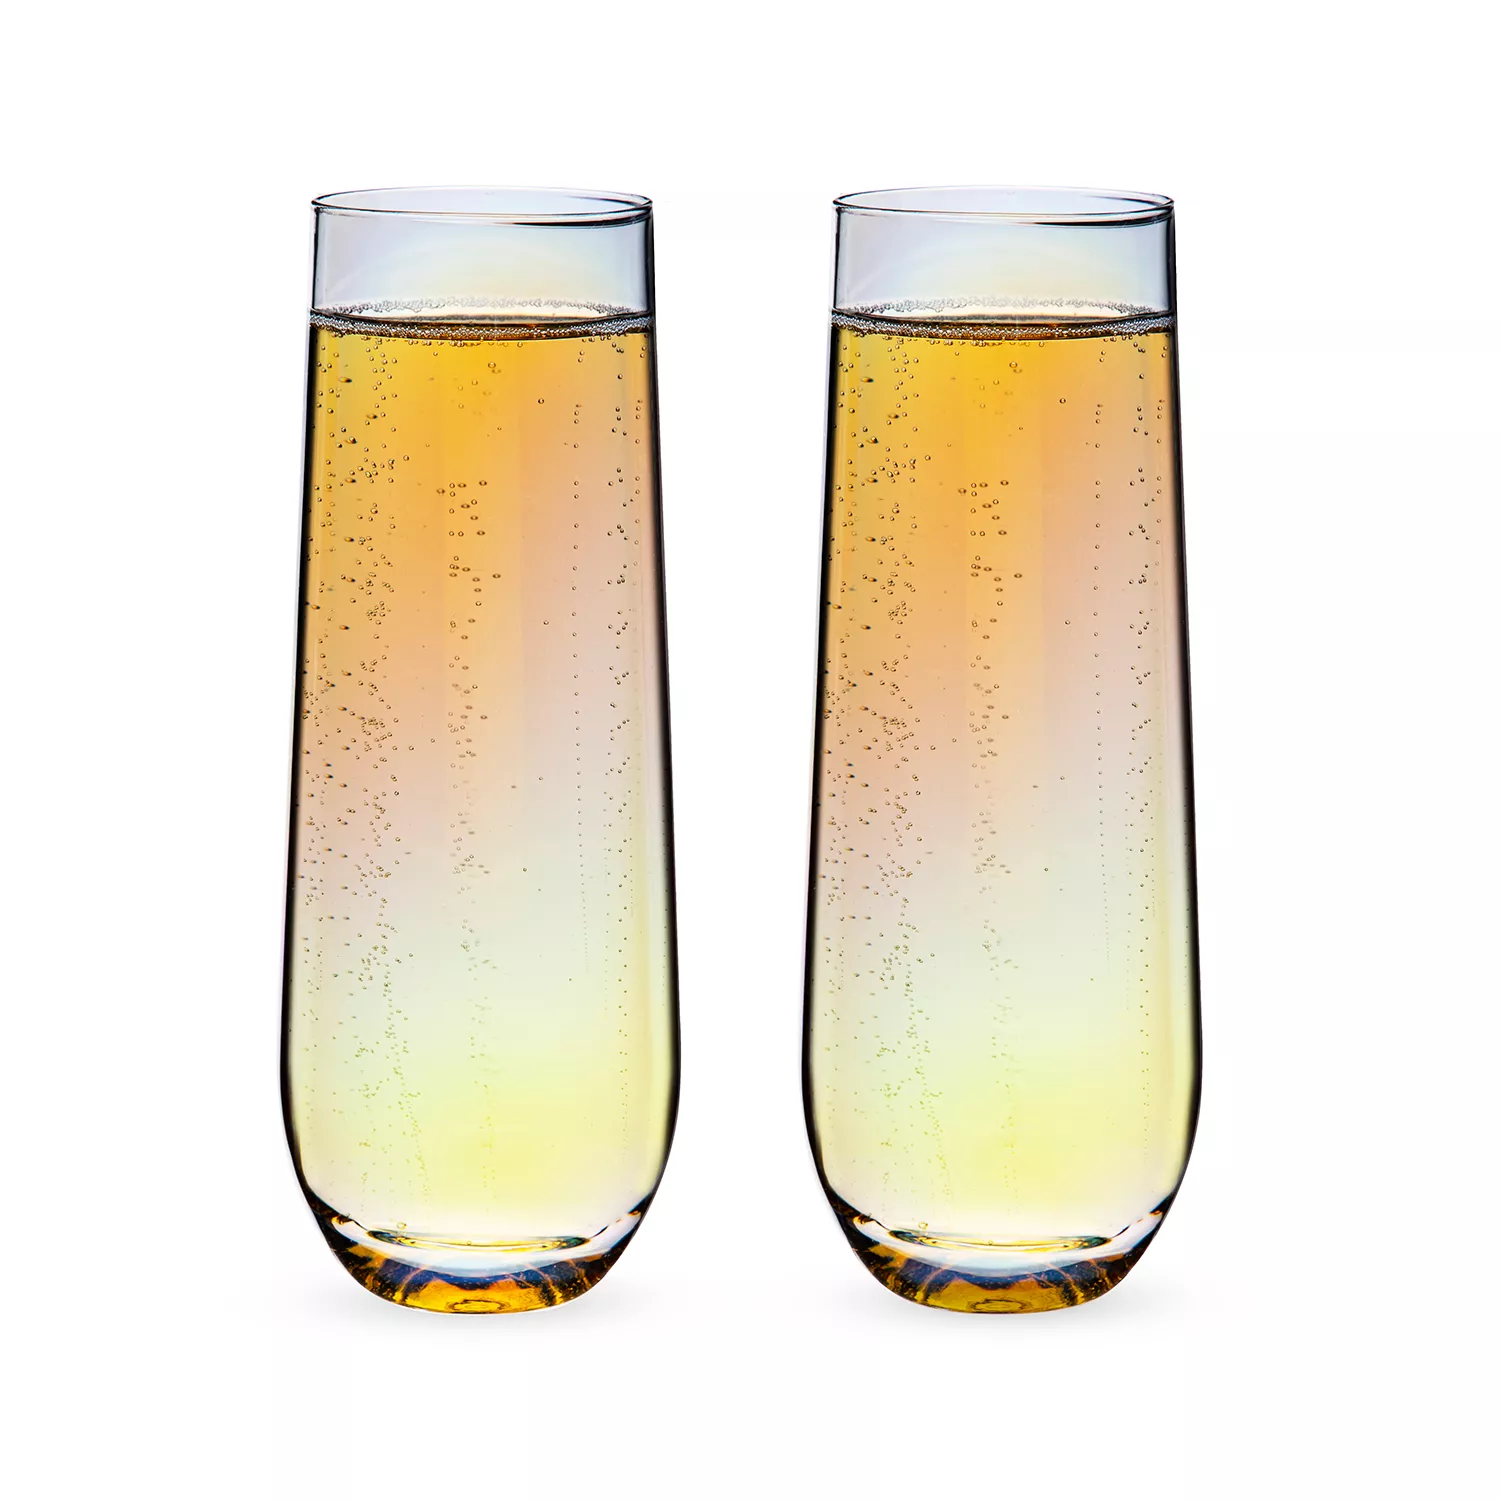 Twine Living Co. Luster Champagne Flutes, Set of 2